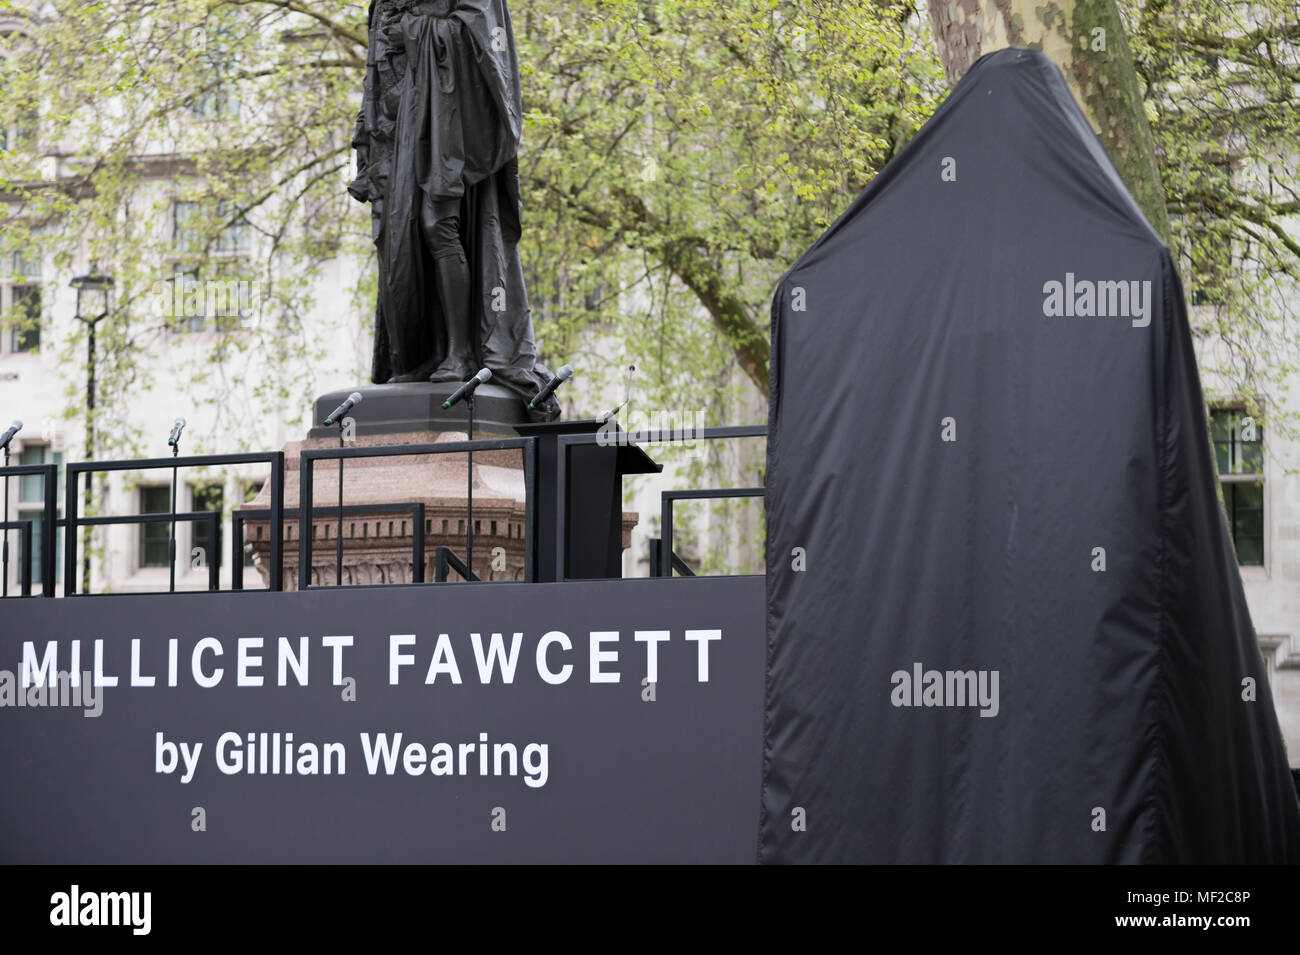 London, UK. 24th April, 2018. Statue of Millicent Fawcett stands veiled in Parliament Square just prior to the unveiling ceremony. The first statue of a woman in Parliament Square joins the line-up of male figures to mark the centenary of women’s suffrage in Britain - two years after the campaign to get female representation outside the Palace of Westminster began. Credit: Guy Corbishley/Alamy Live News Stock Photo